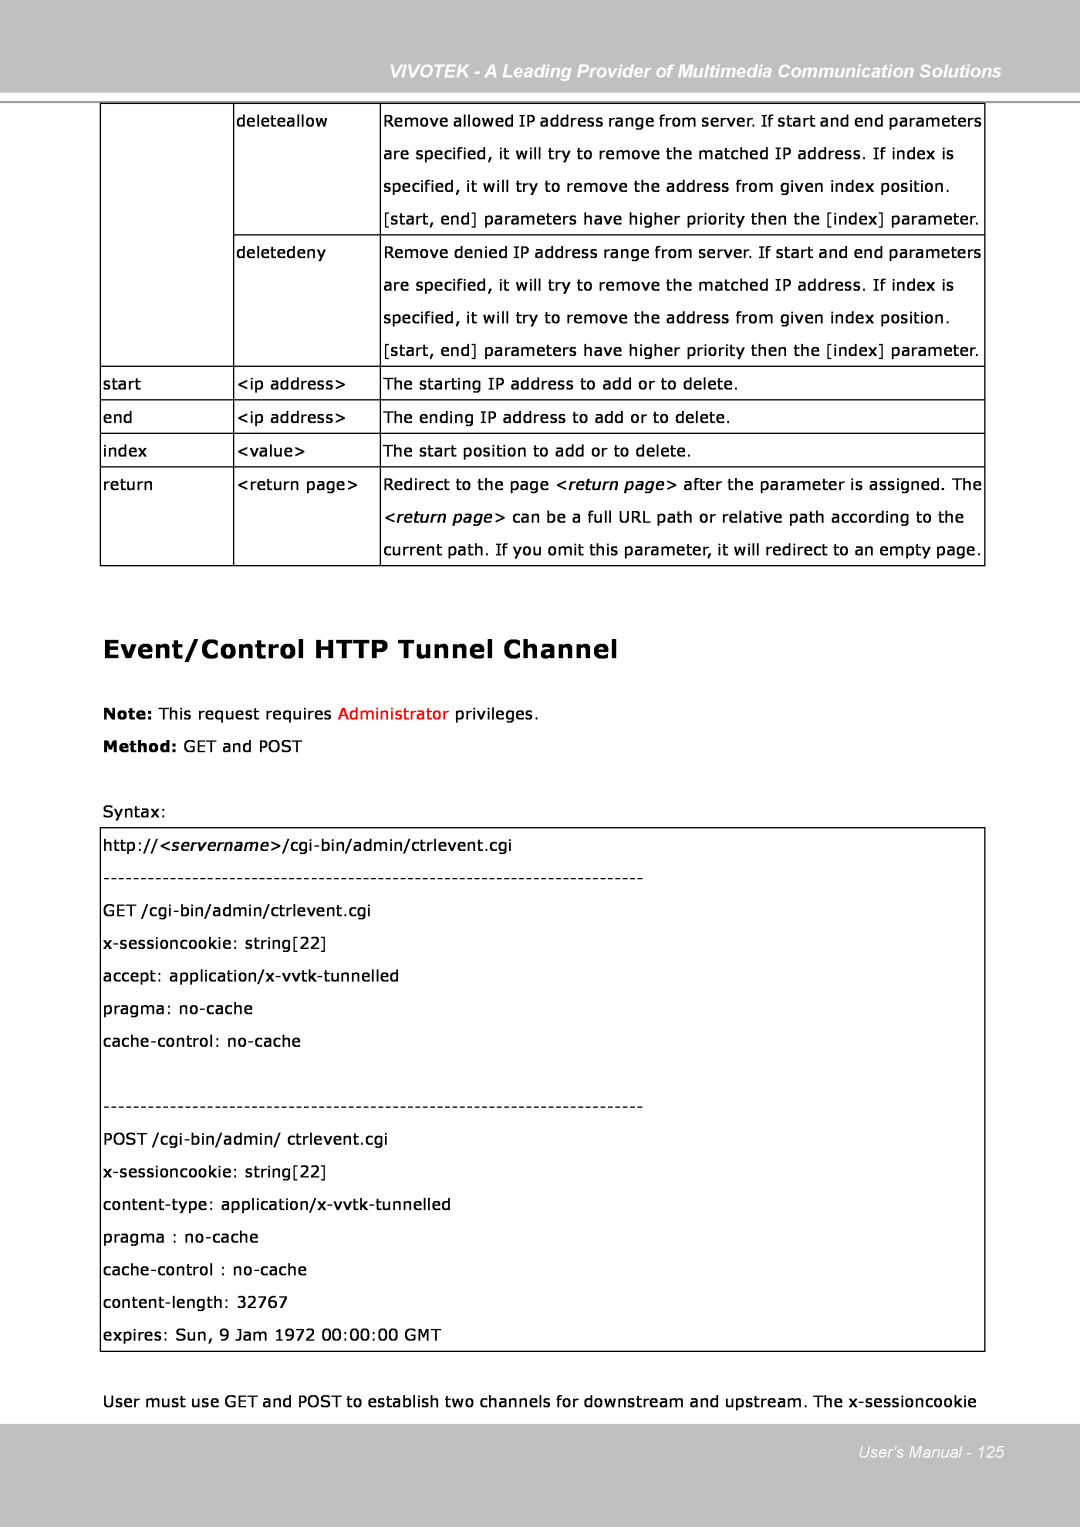 Vivotek FD7141(V) manual Event/Control HTTP Tunnel Channel, Users Manual 